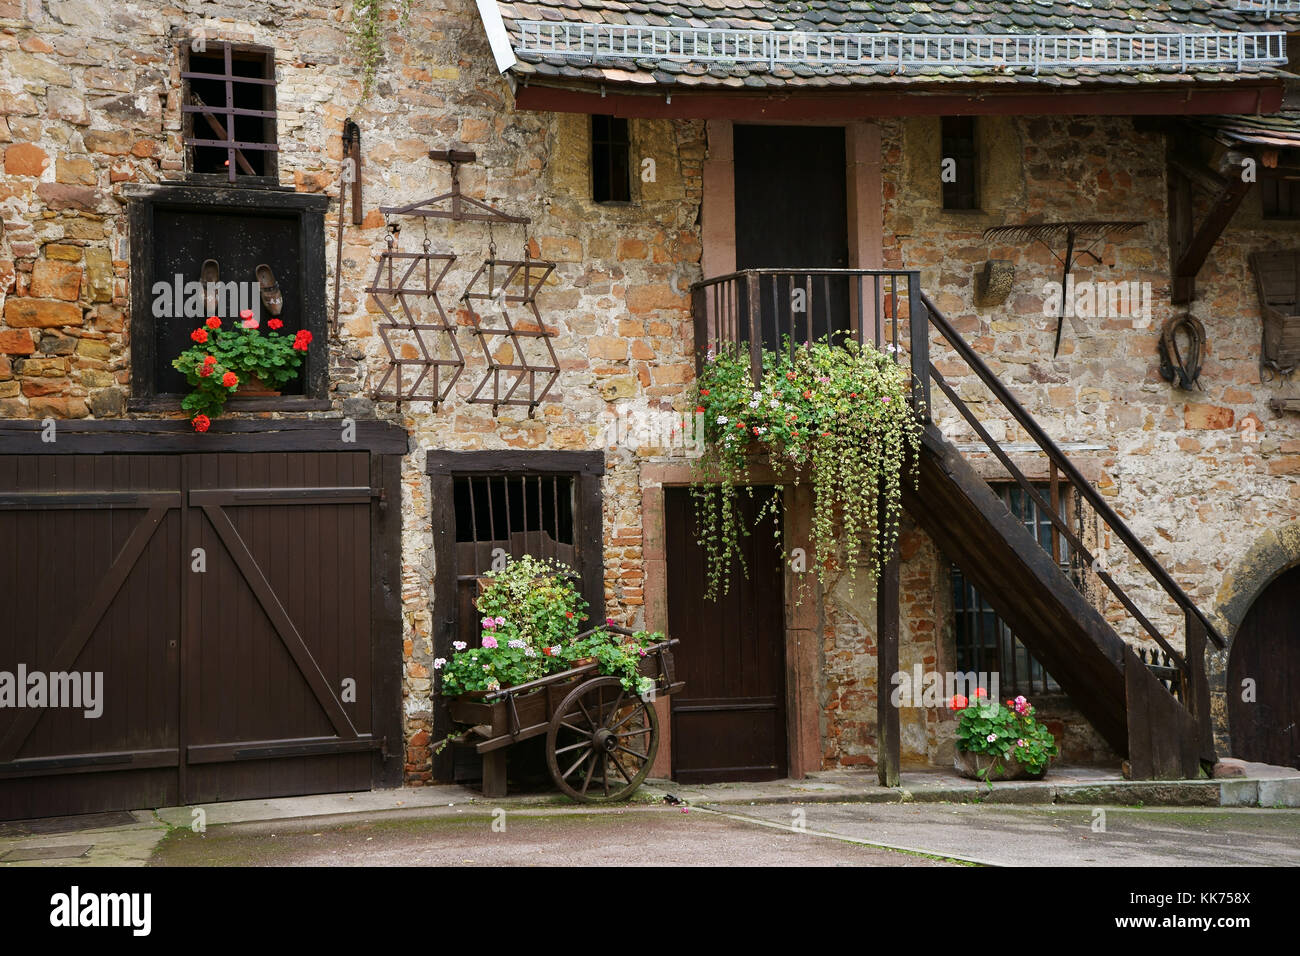 Cour du Weinhof, 14th century wine manufacturing building. hisoric town Colma, Alasace, France Stock Photo